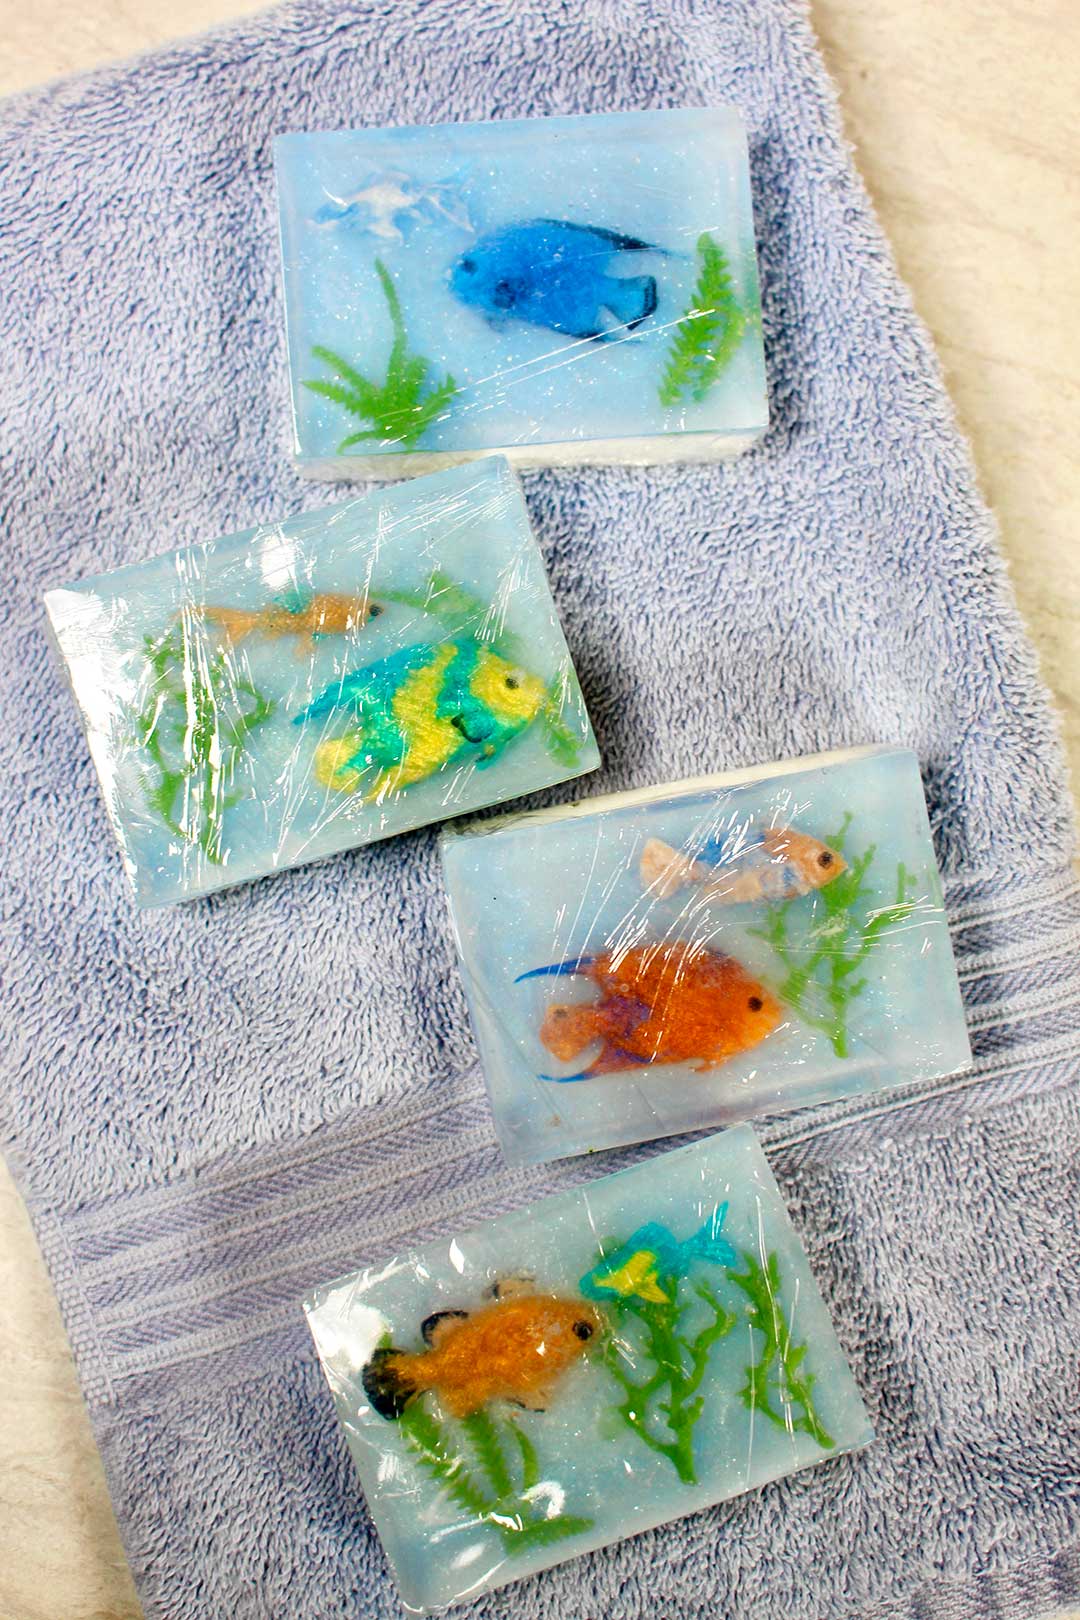 Four completed soaps, packaged in plastic wrap resting on a blue bath towel.